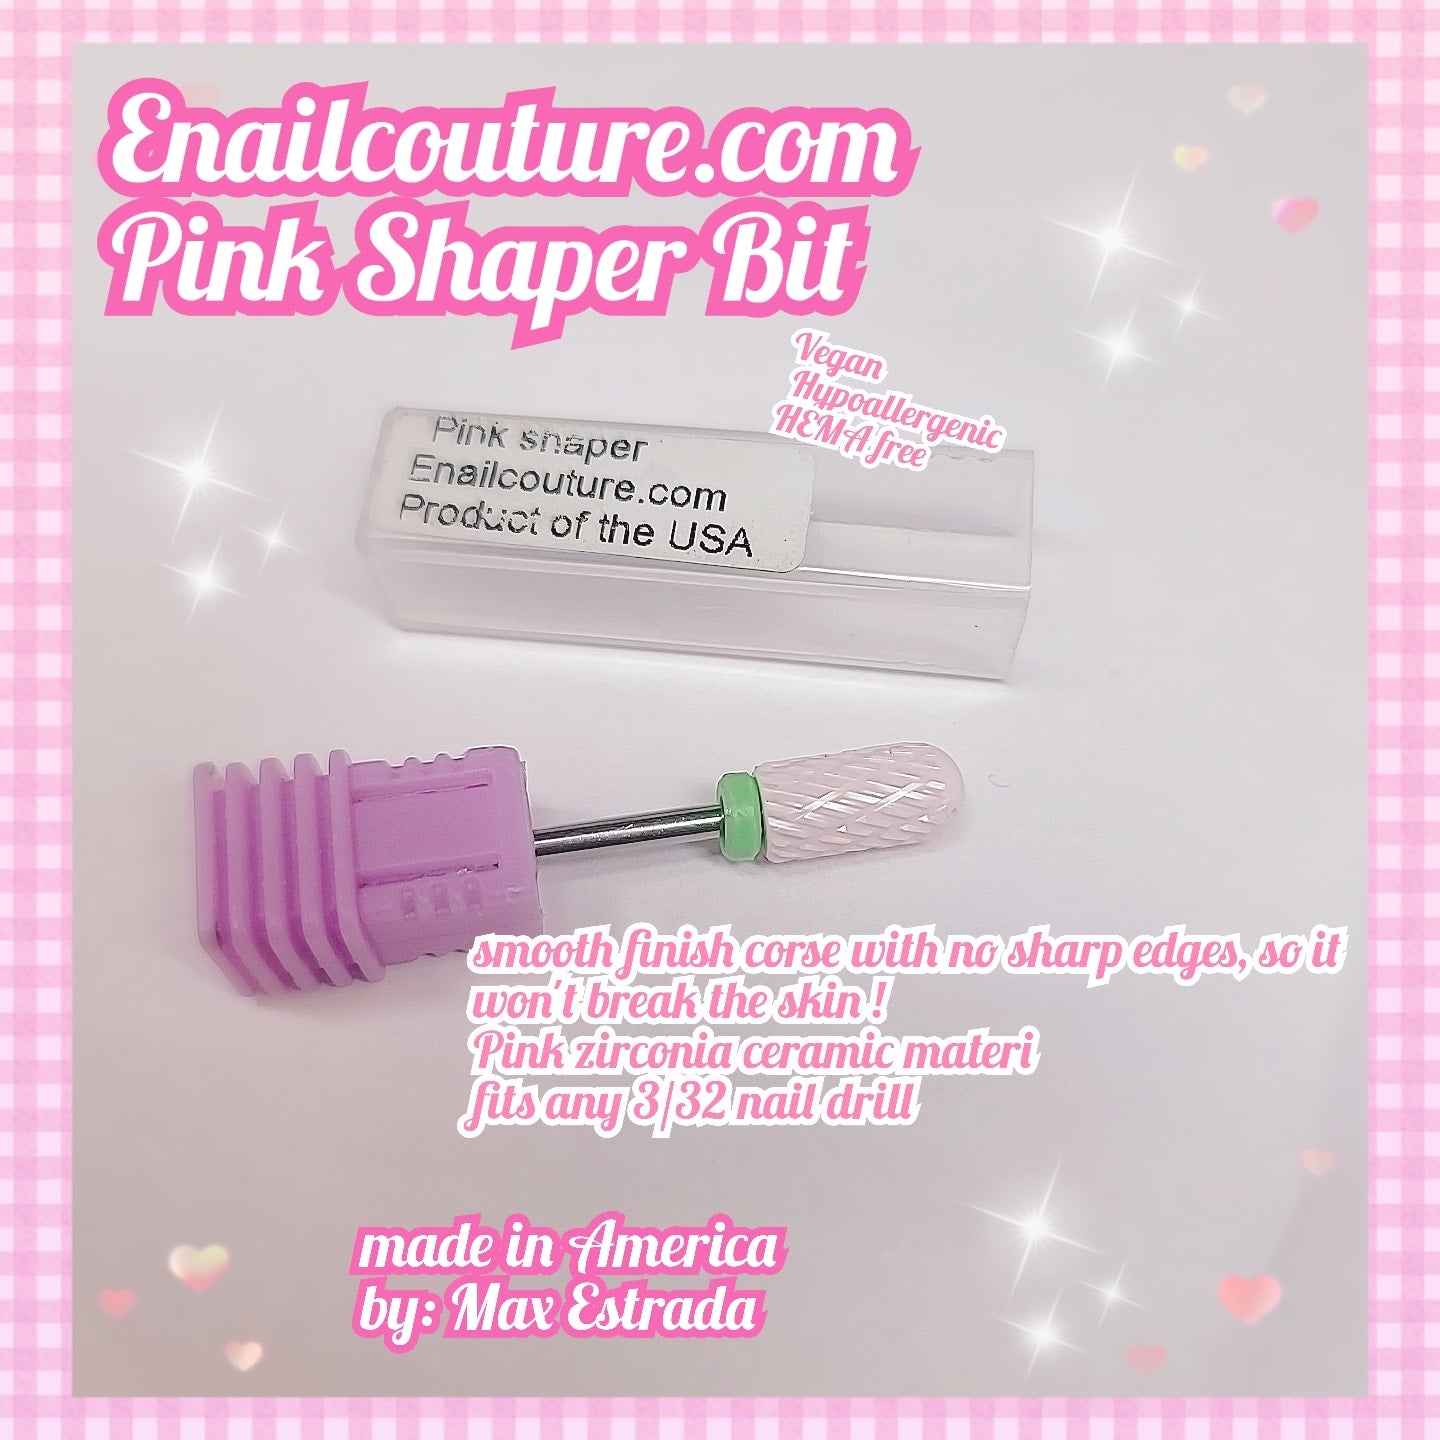 Pink Shaper (ceramic Nail Drill Bitt,3/32'' (2.35mm) Professional Cylindrical Ceramic Bits,Cuticle Nail File Bits for Acrylic Nails,Manicure Pedicure Home & Salon Use-Both Left and Right Handed)